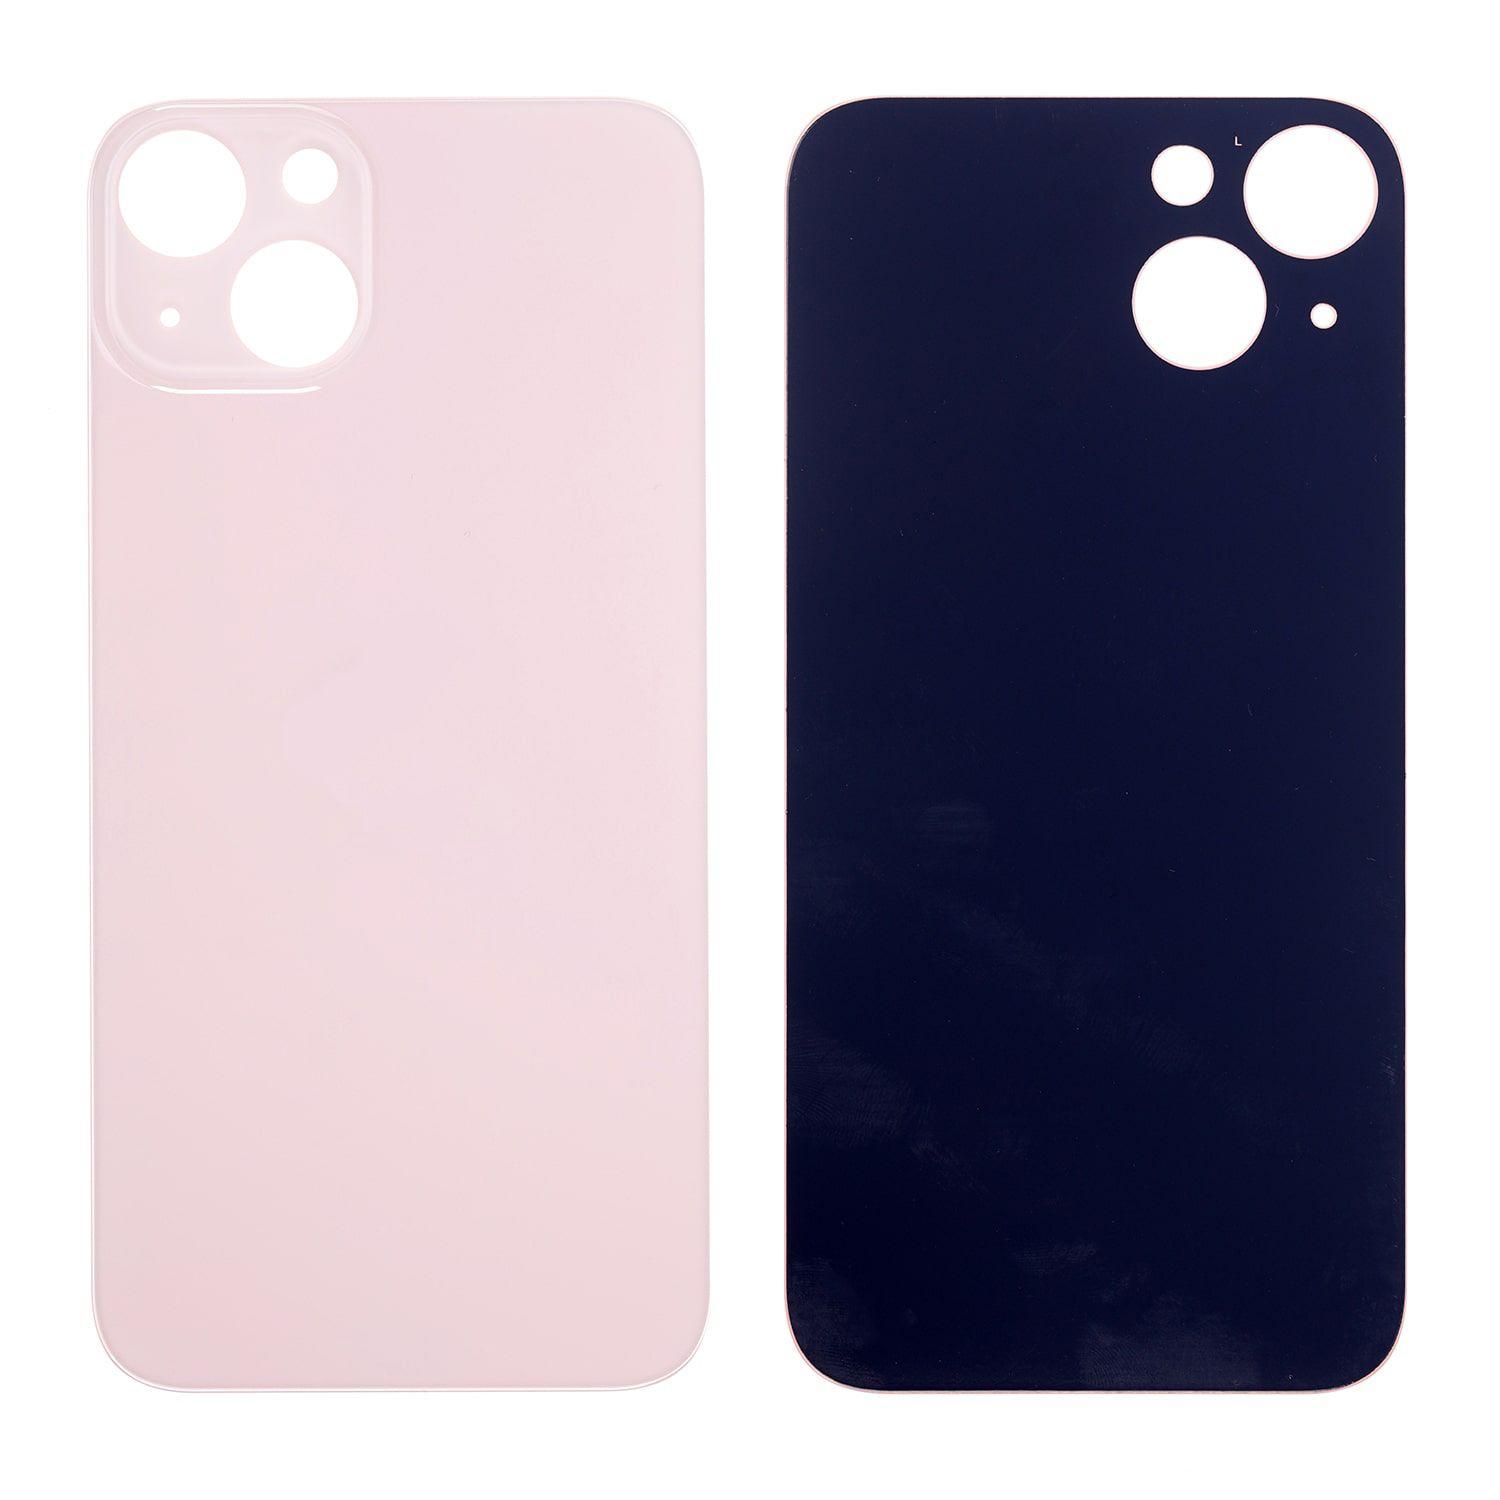 Battery cover iPhone 13 with bigger hole for camera glass - pink